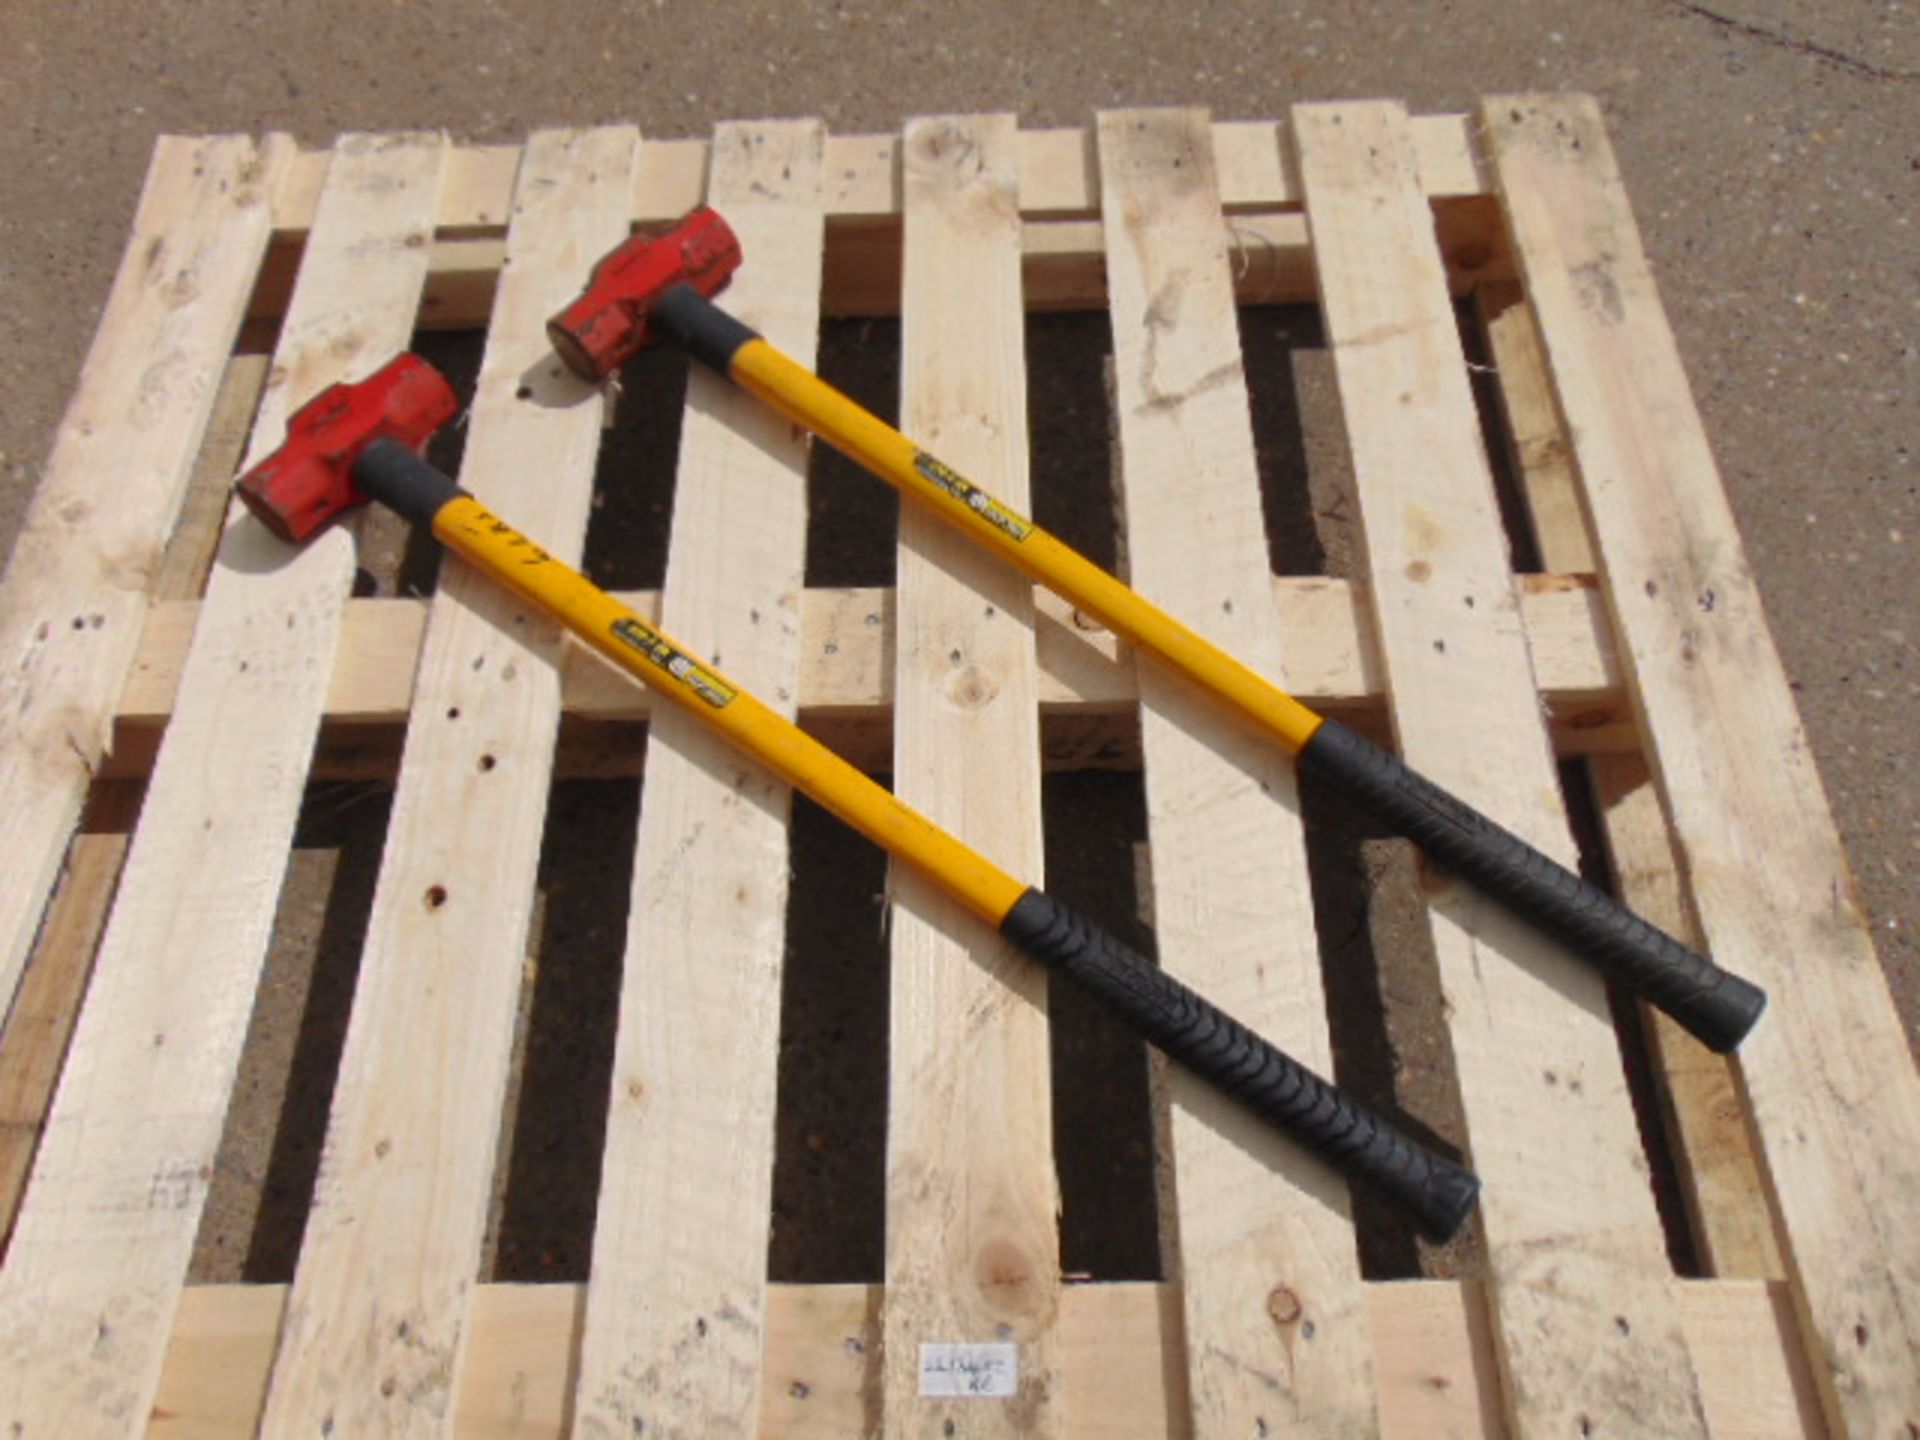 2 x Stower 6lb Sledge Hammers